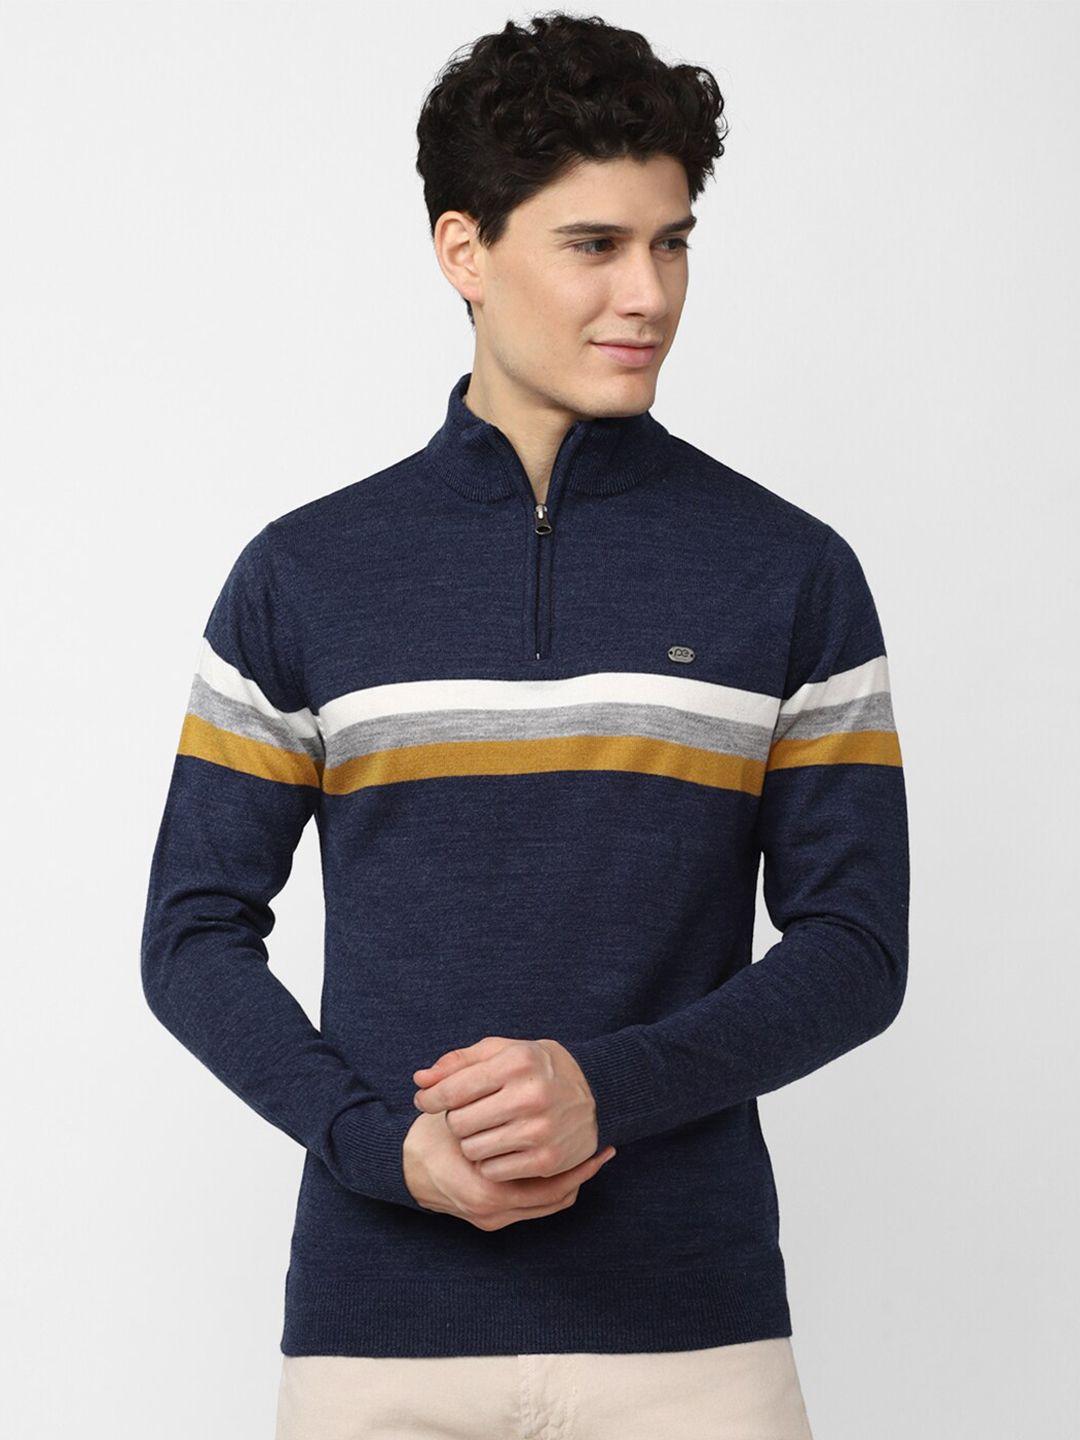 peter england casuals men navy blue & white striped pullover